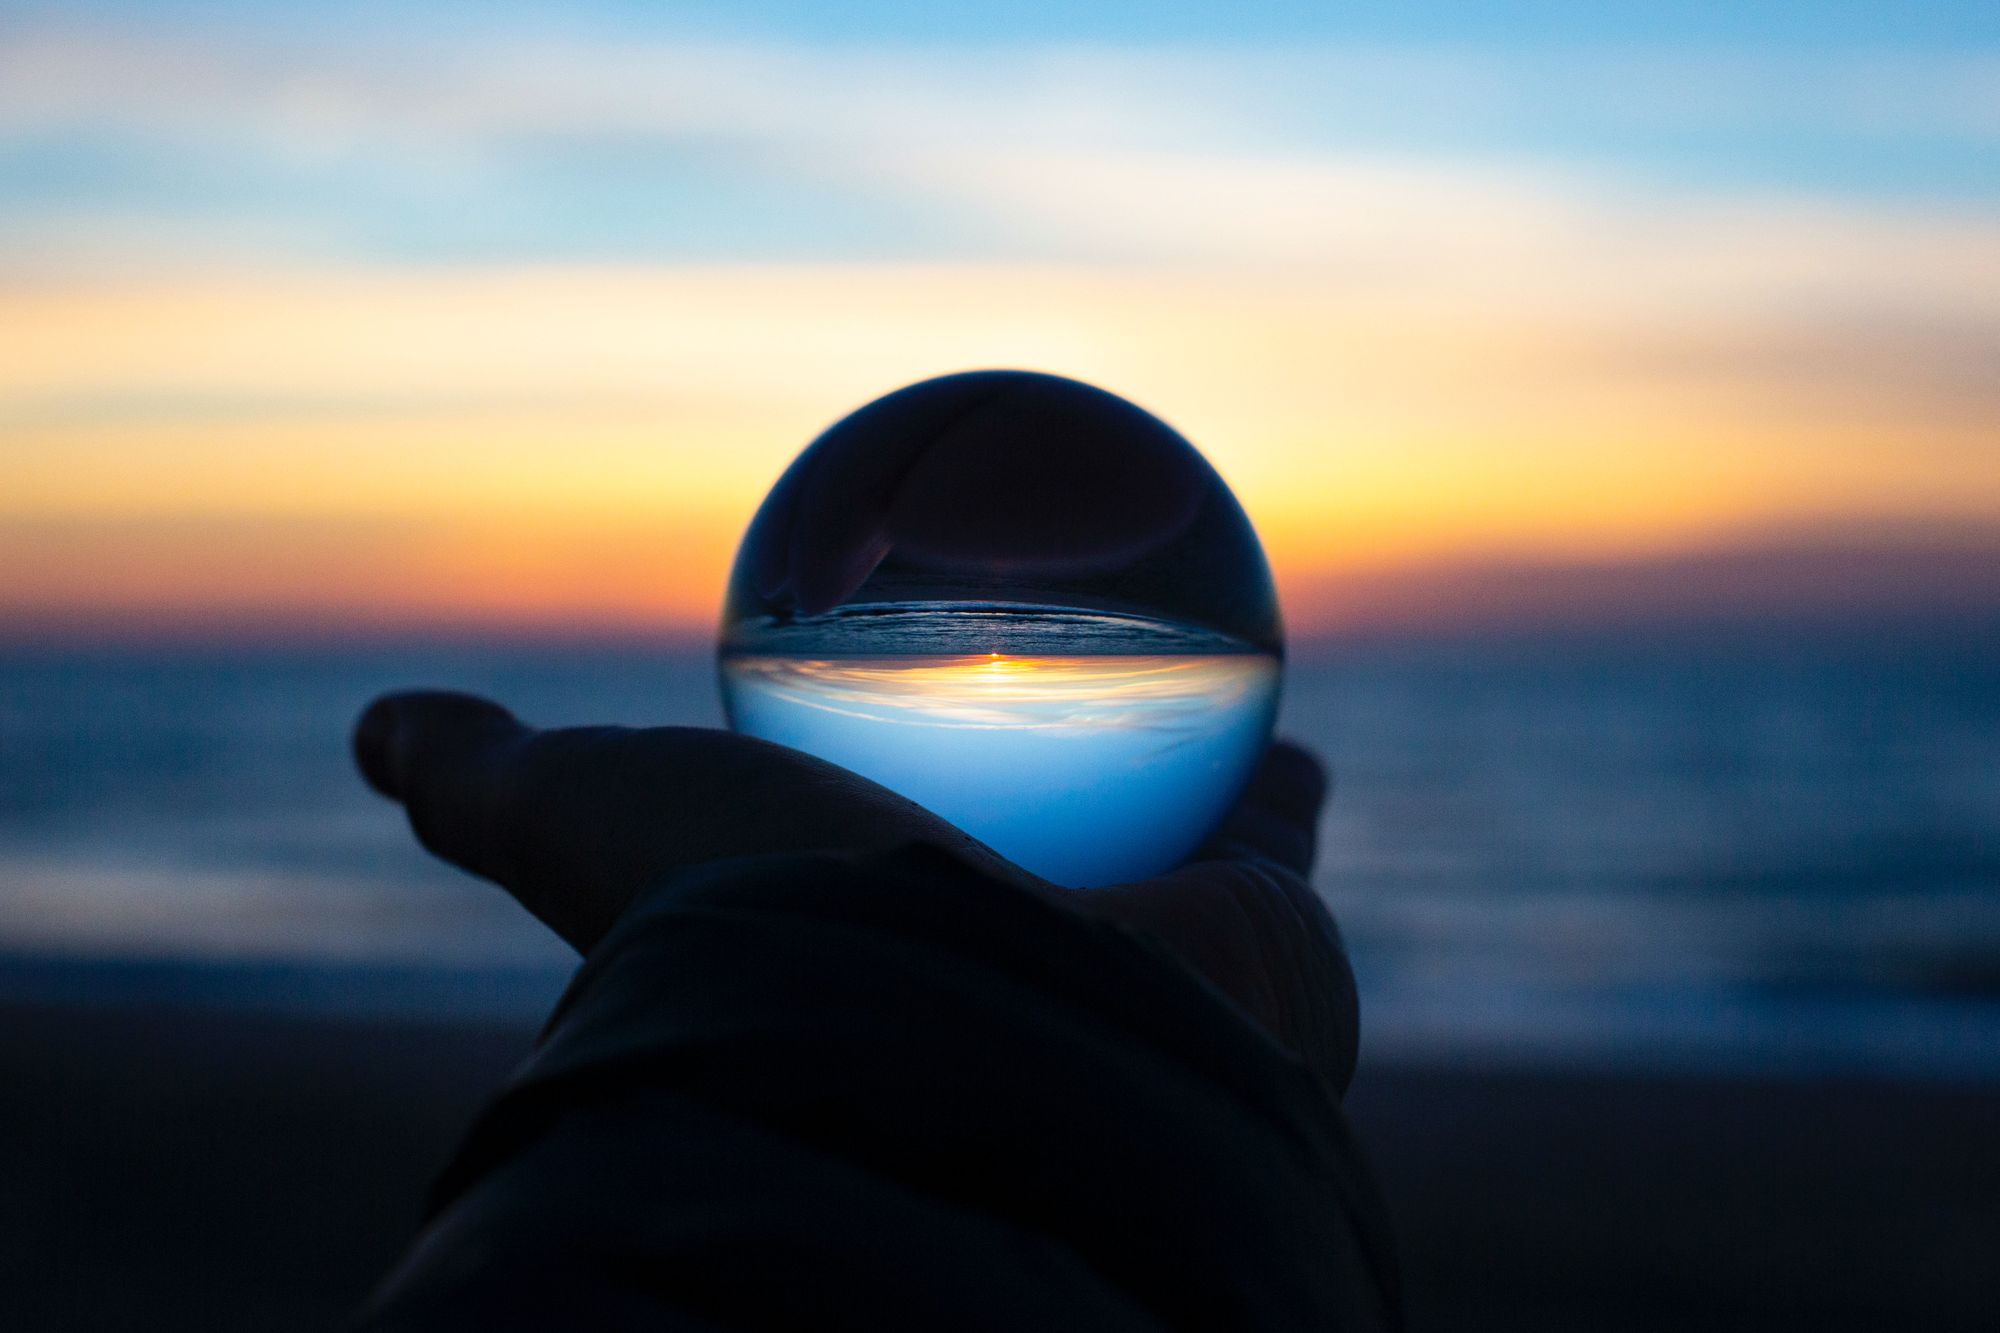 Silhouette of a hand holding a glass orb against a sunset.